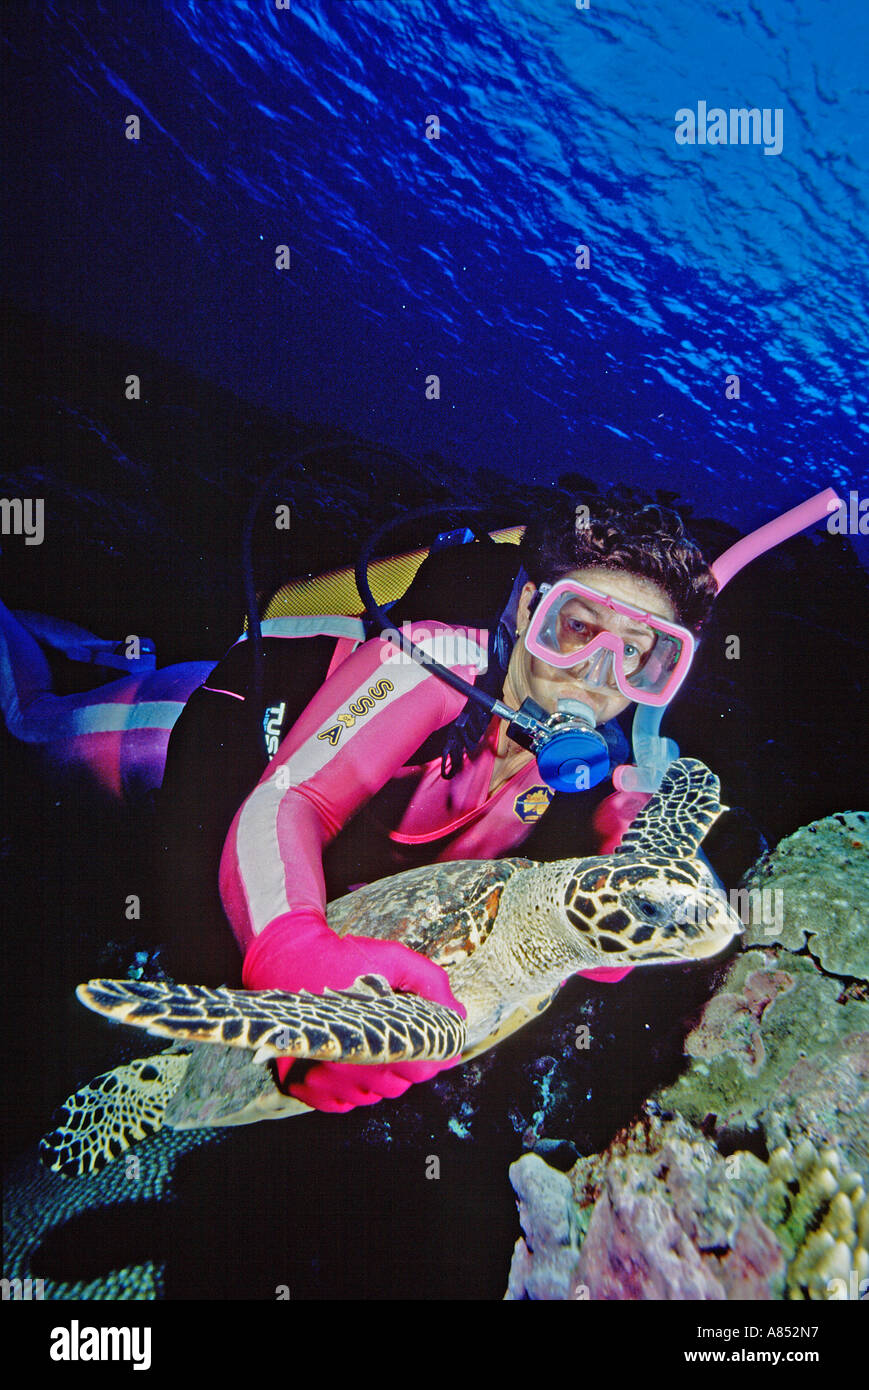 Scuba diving. Female diver with Hawksbill Turtle. Micronesia coral reef. Stock Photo